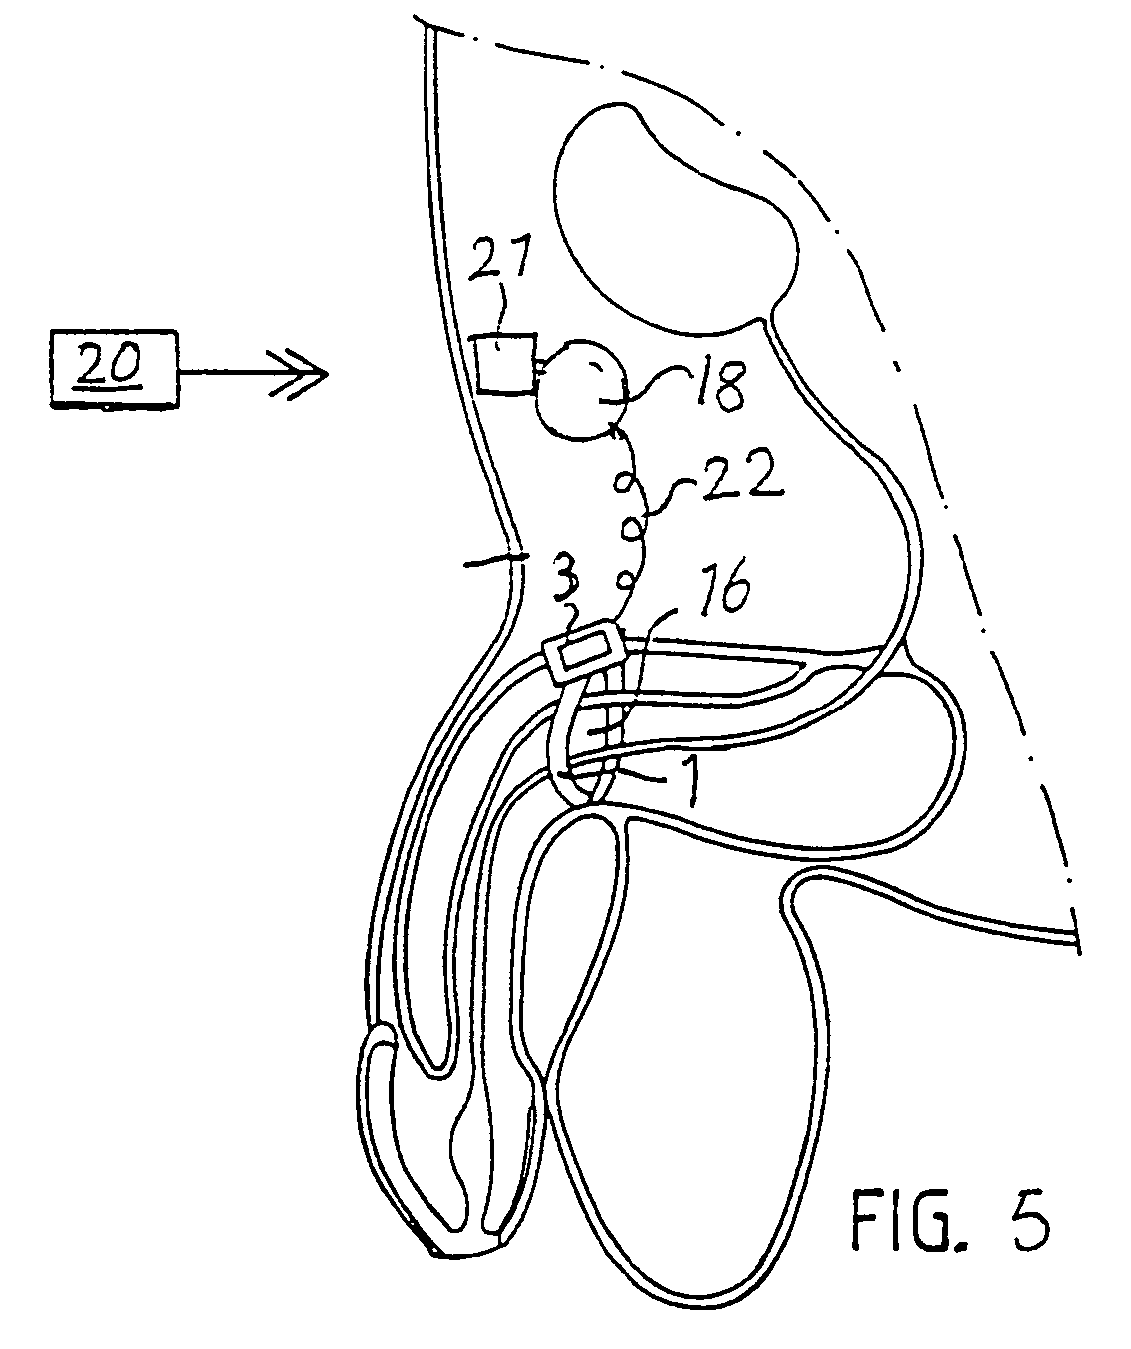 Impotence treatment apparatus with connection device